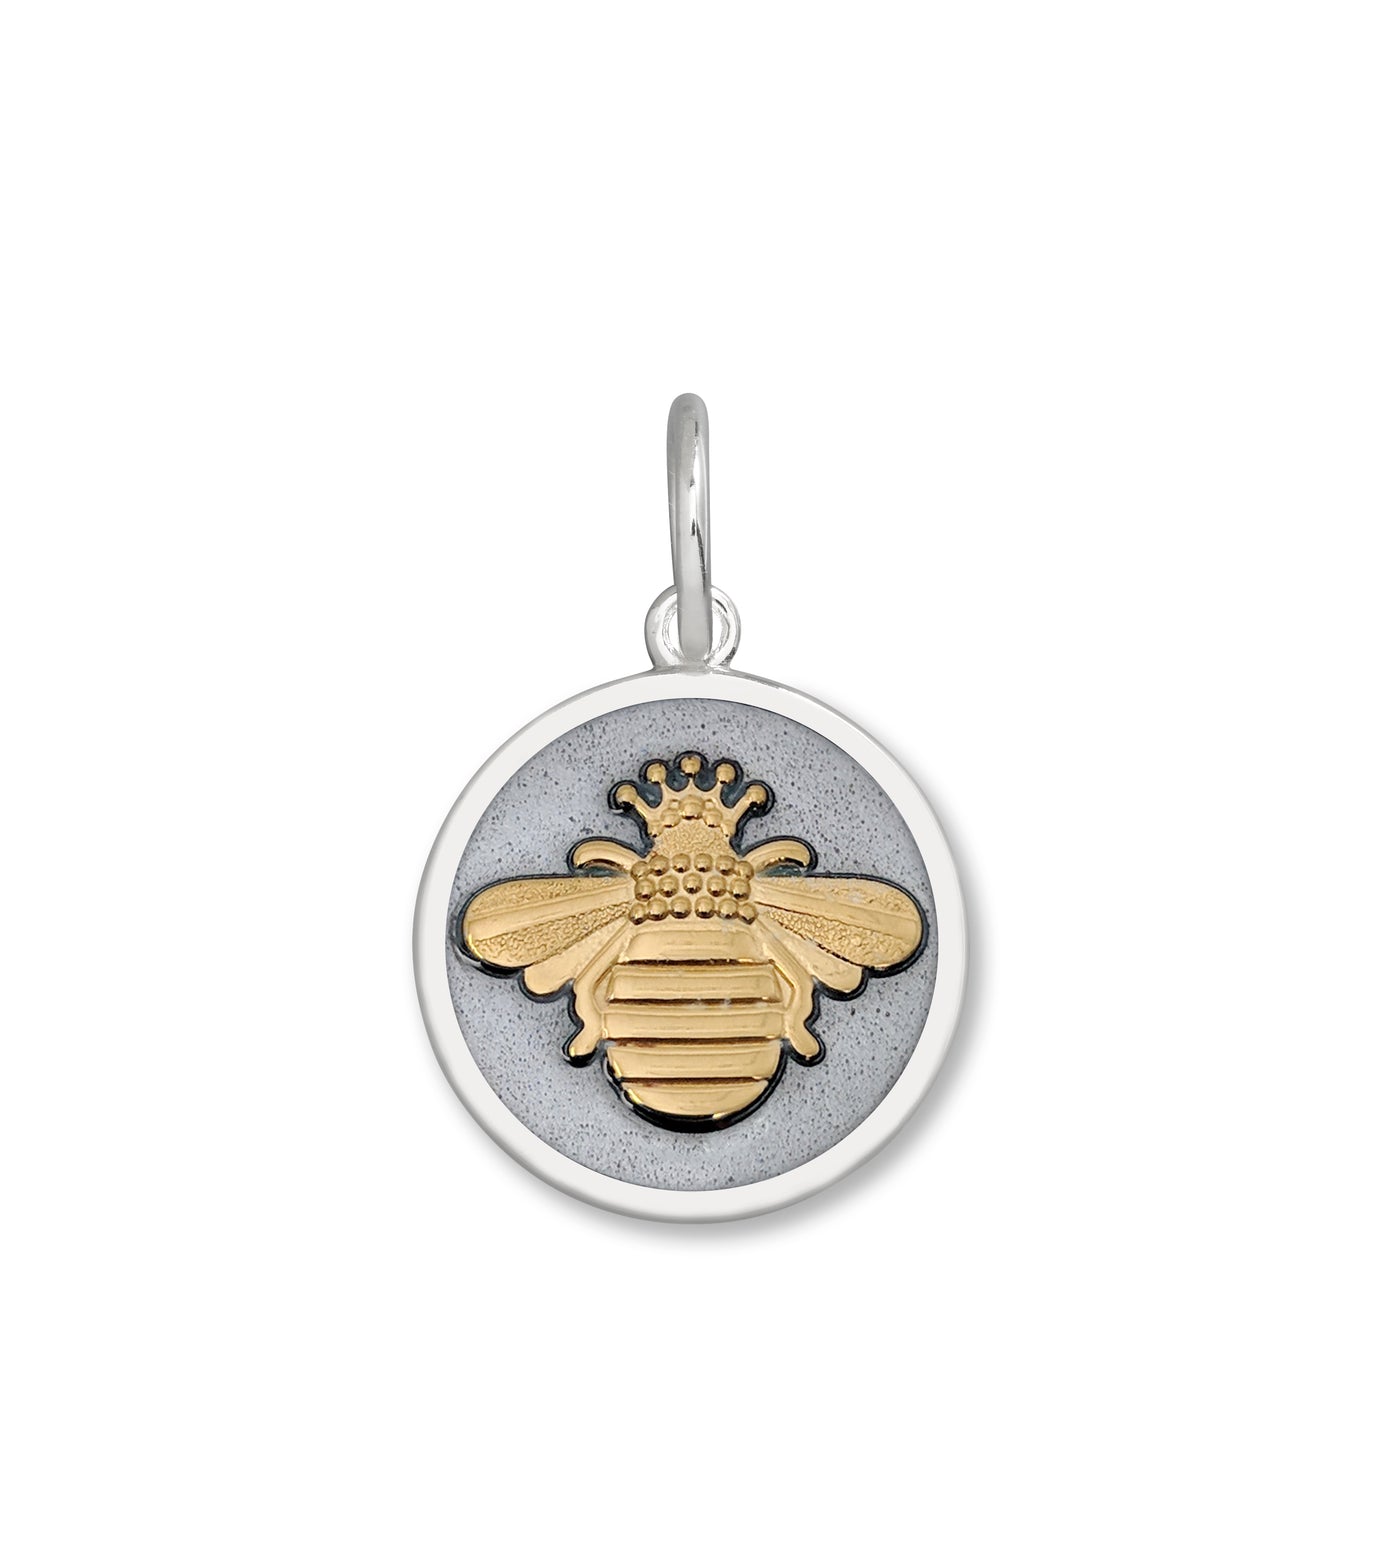 Lola & Company Jewelry Queen Bee Pendant Gold in Pewter